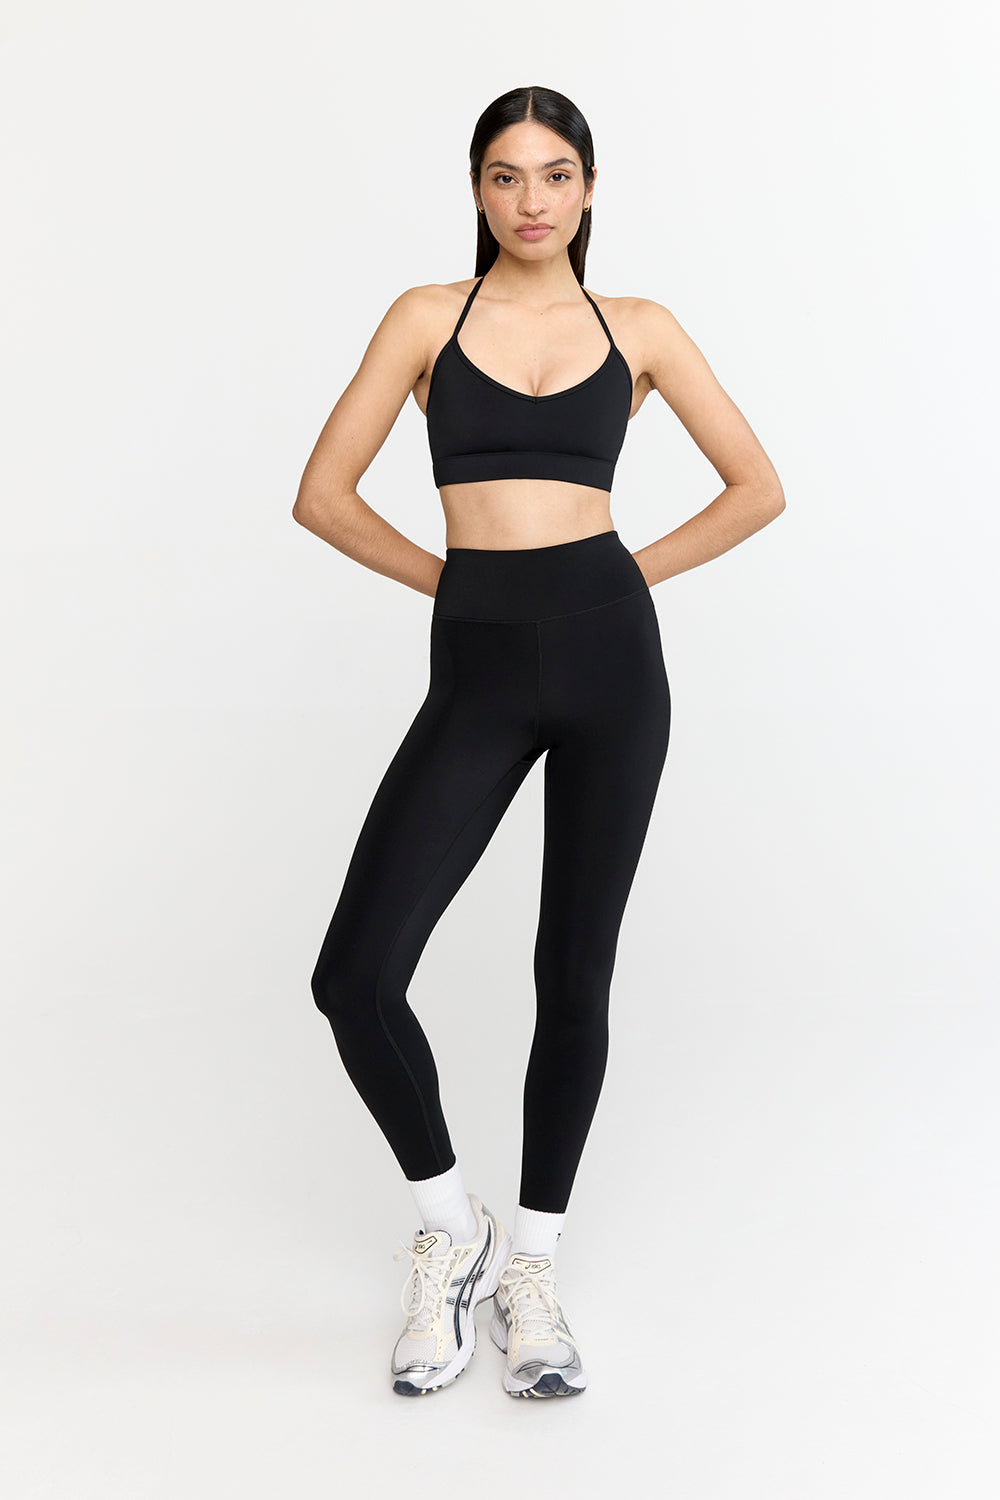 TALA Skinluxe tank medium support sports bra in pink exclusive to ASOS, ASOS in 2023